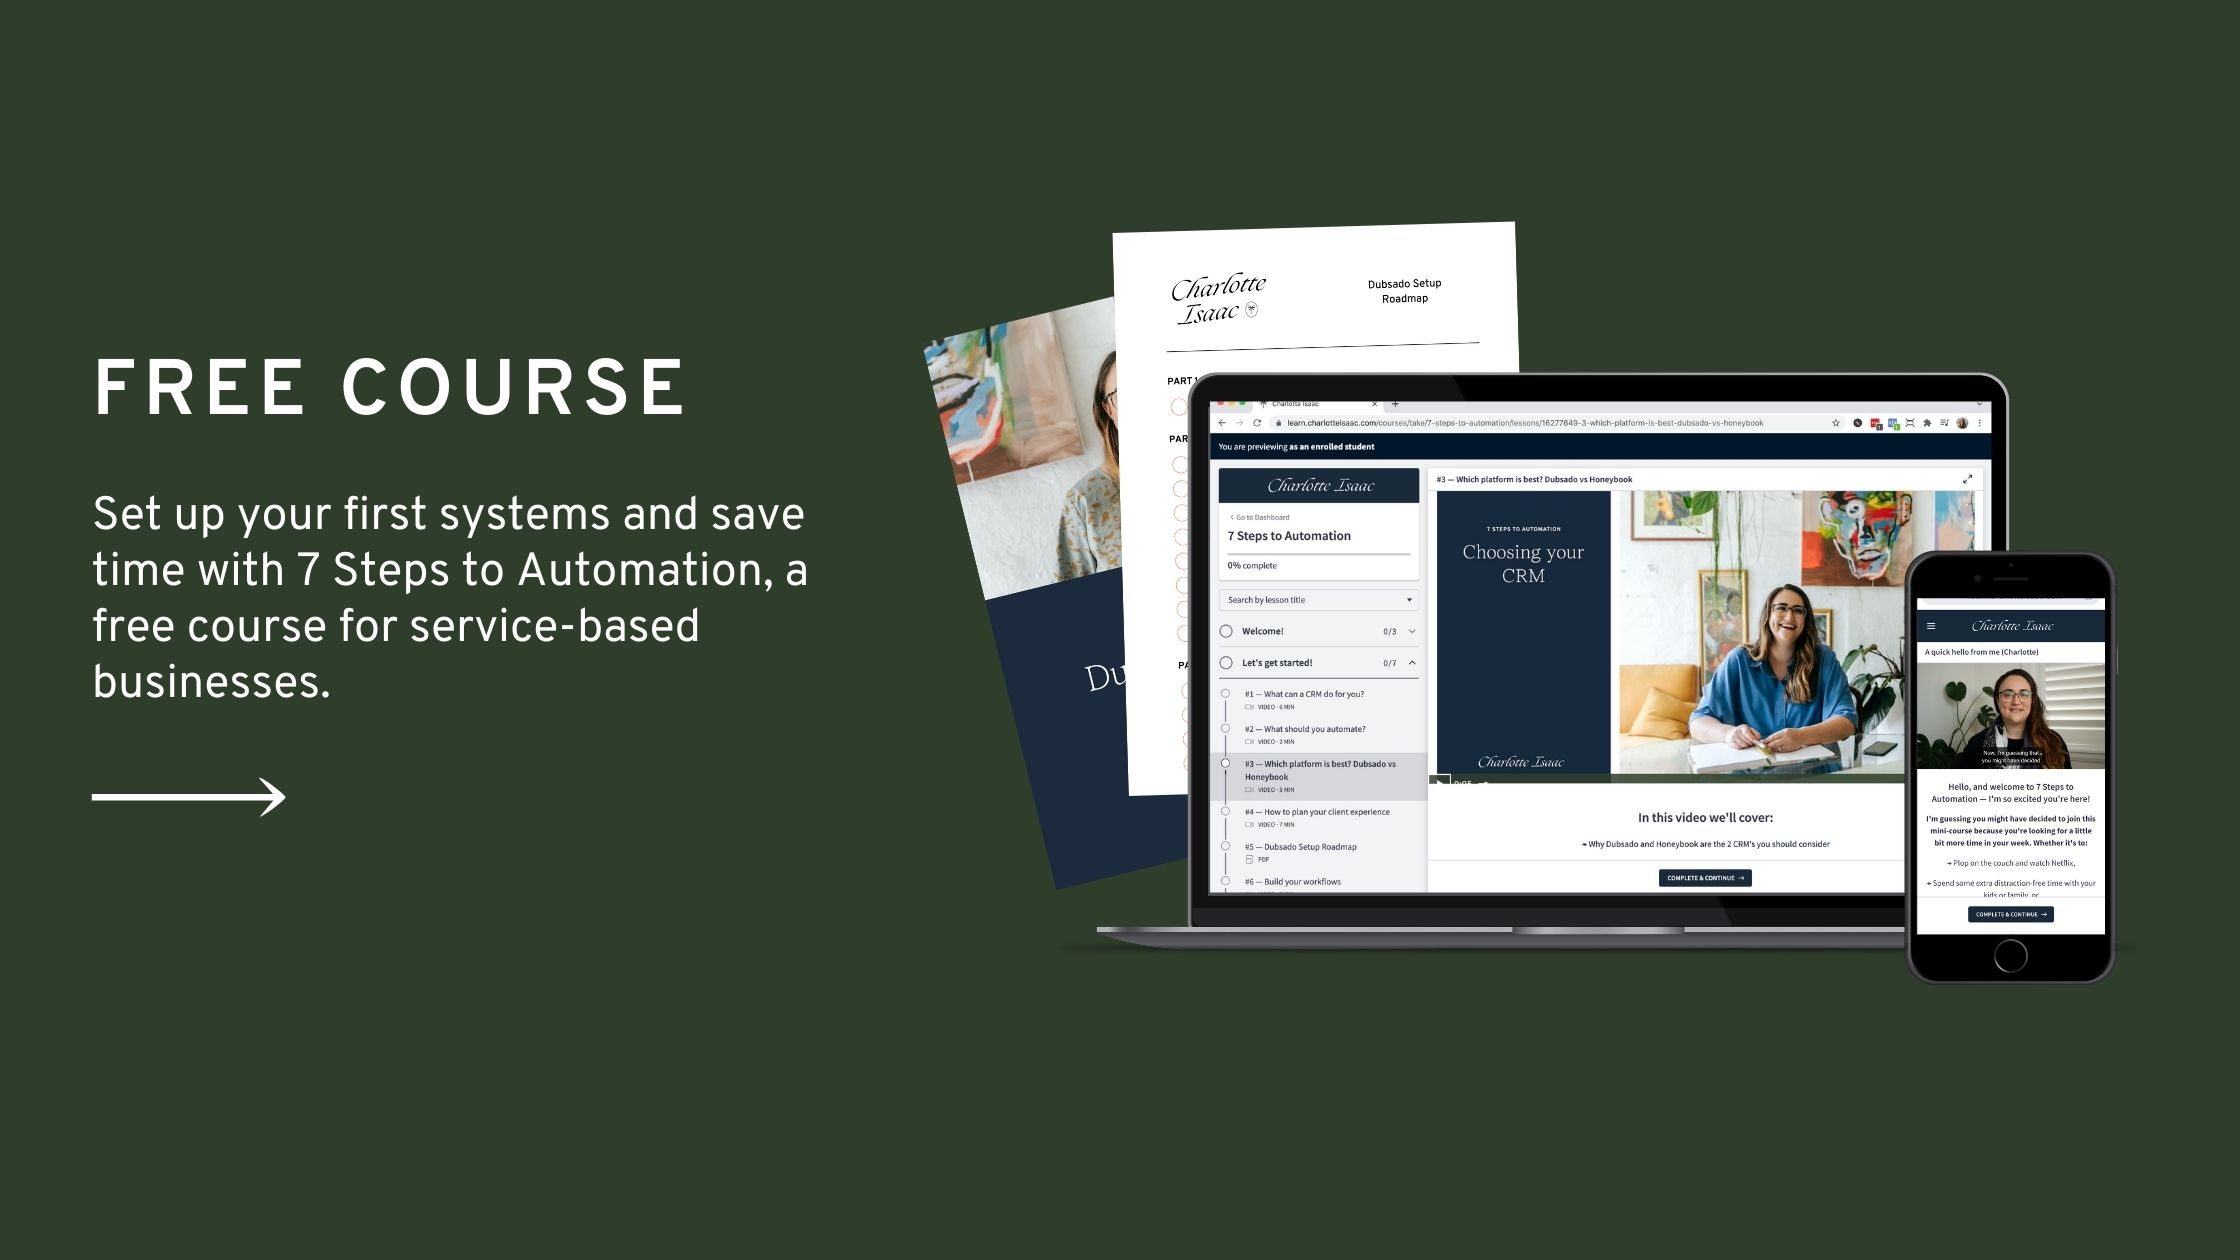 Start using Dubsado automation with this free course, 7 Steps to Automation